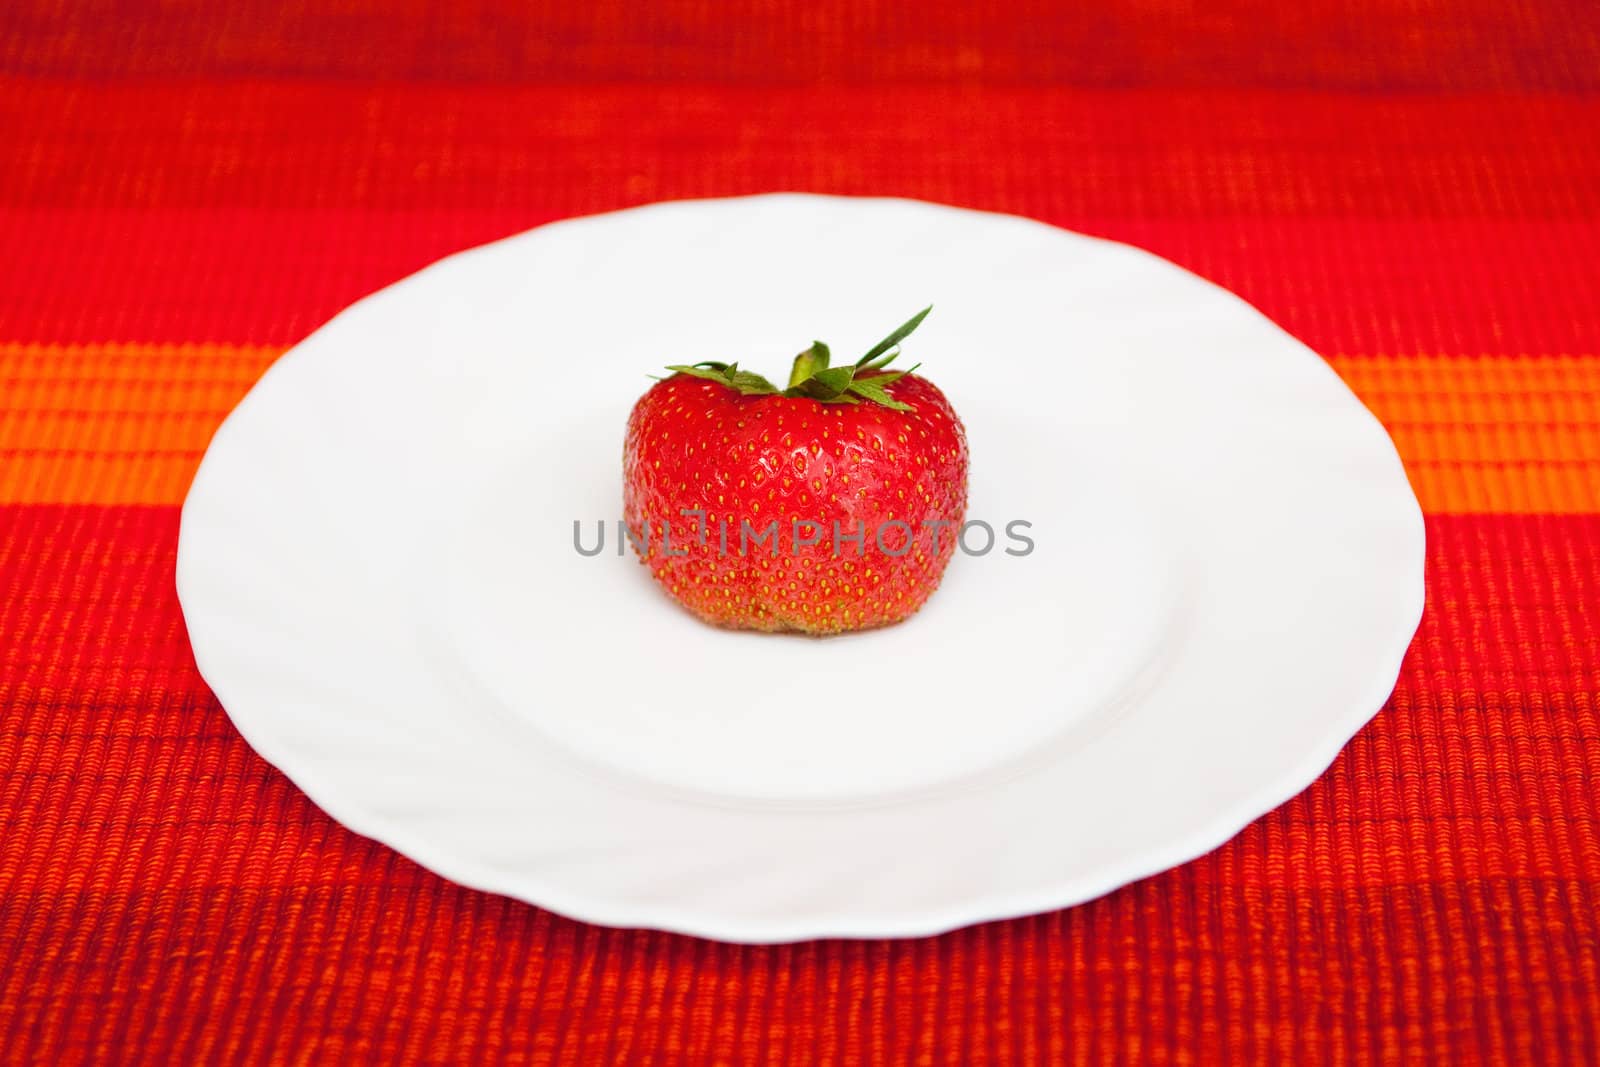 A fresh strawberry on the white plate